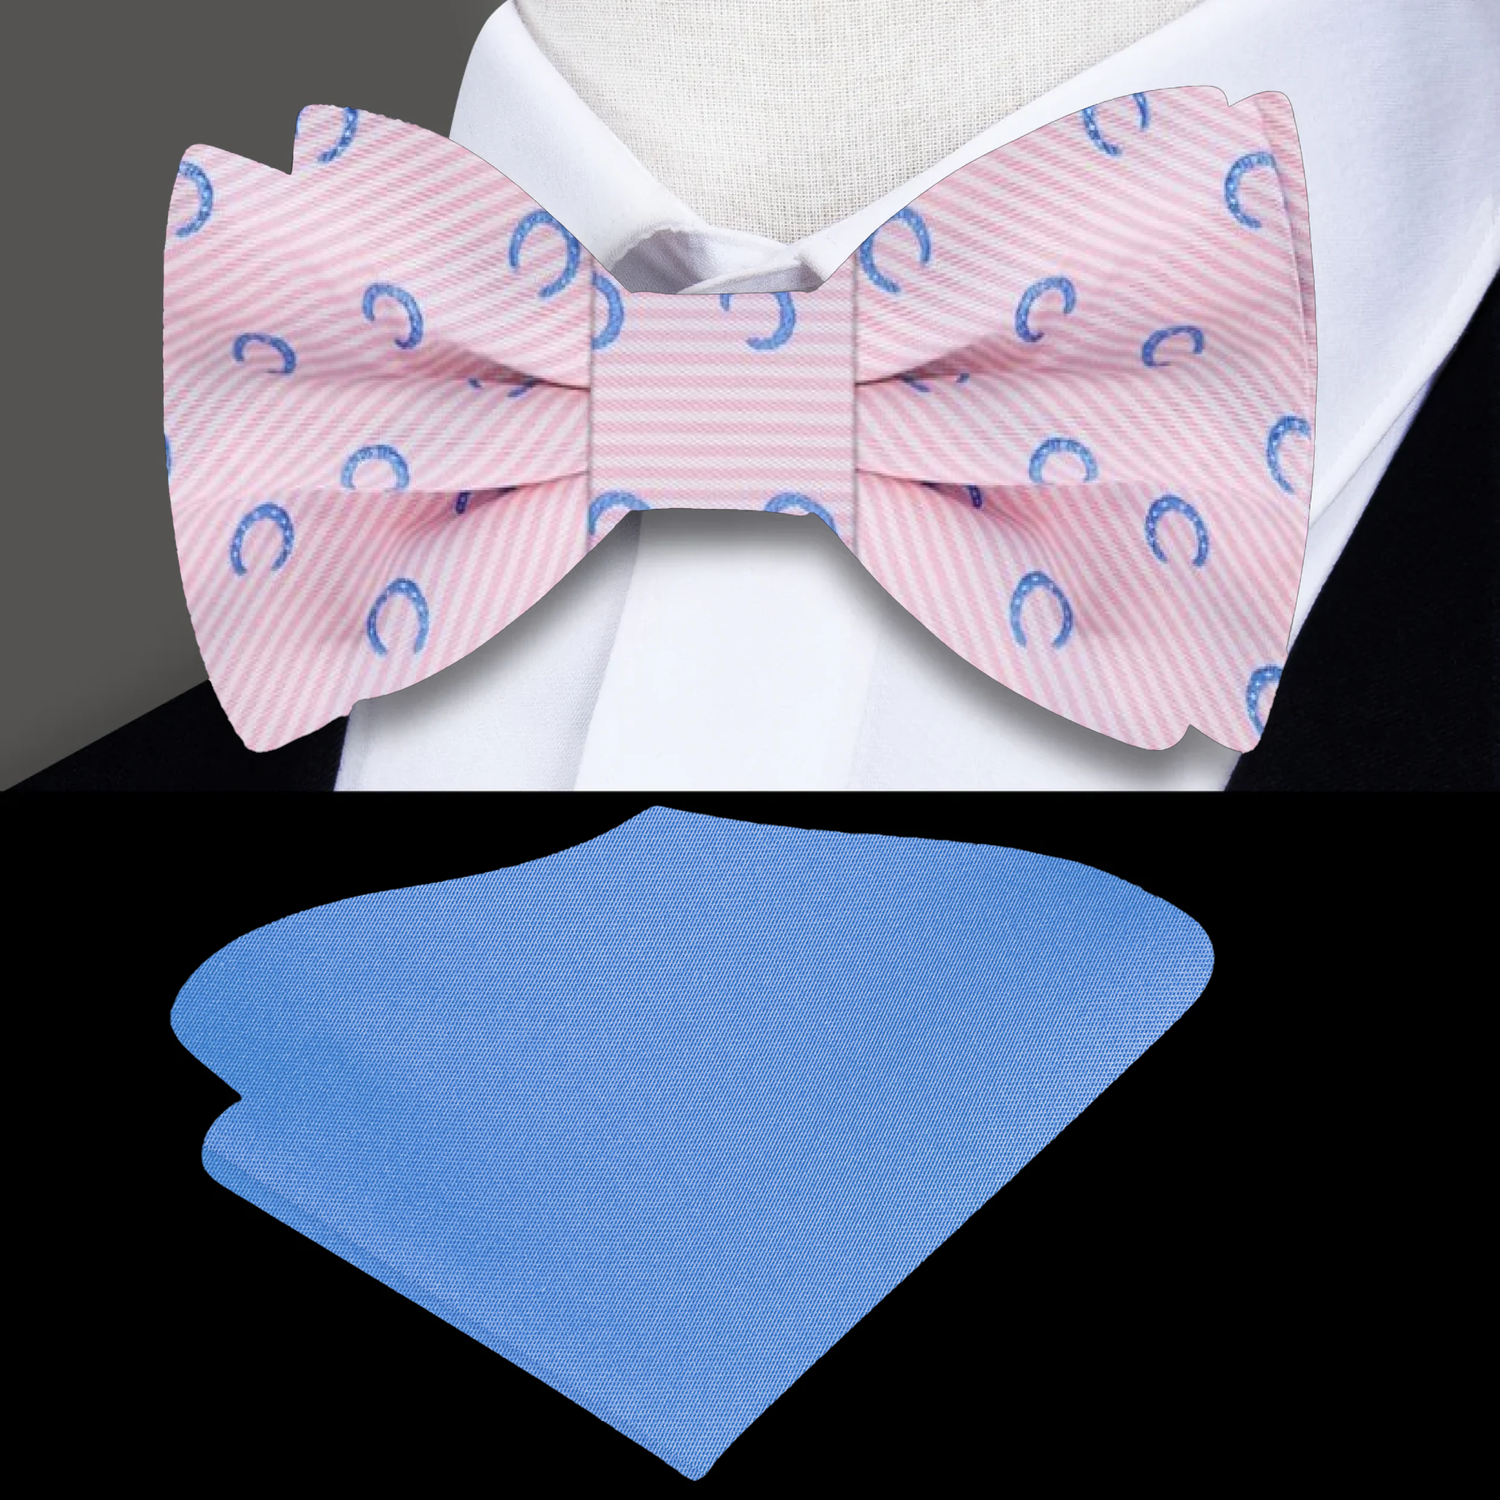 Light Pink Light Blue Horseshoes Tie And Blue Pocket Square